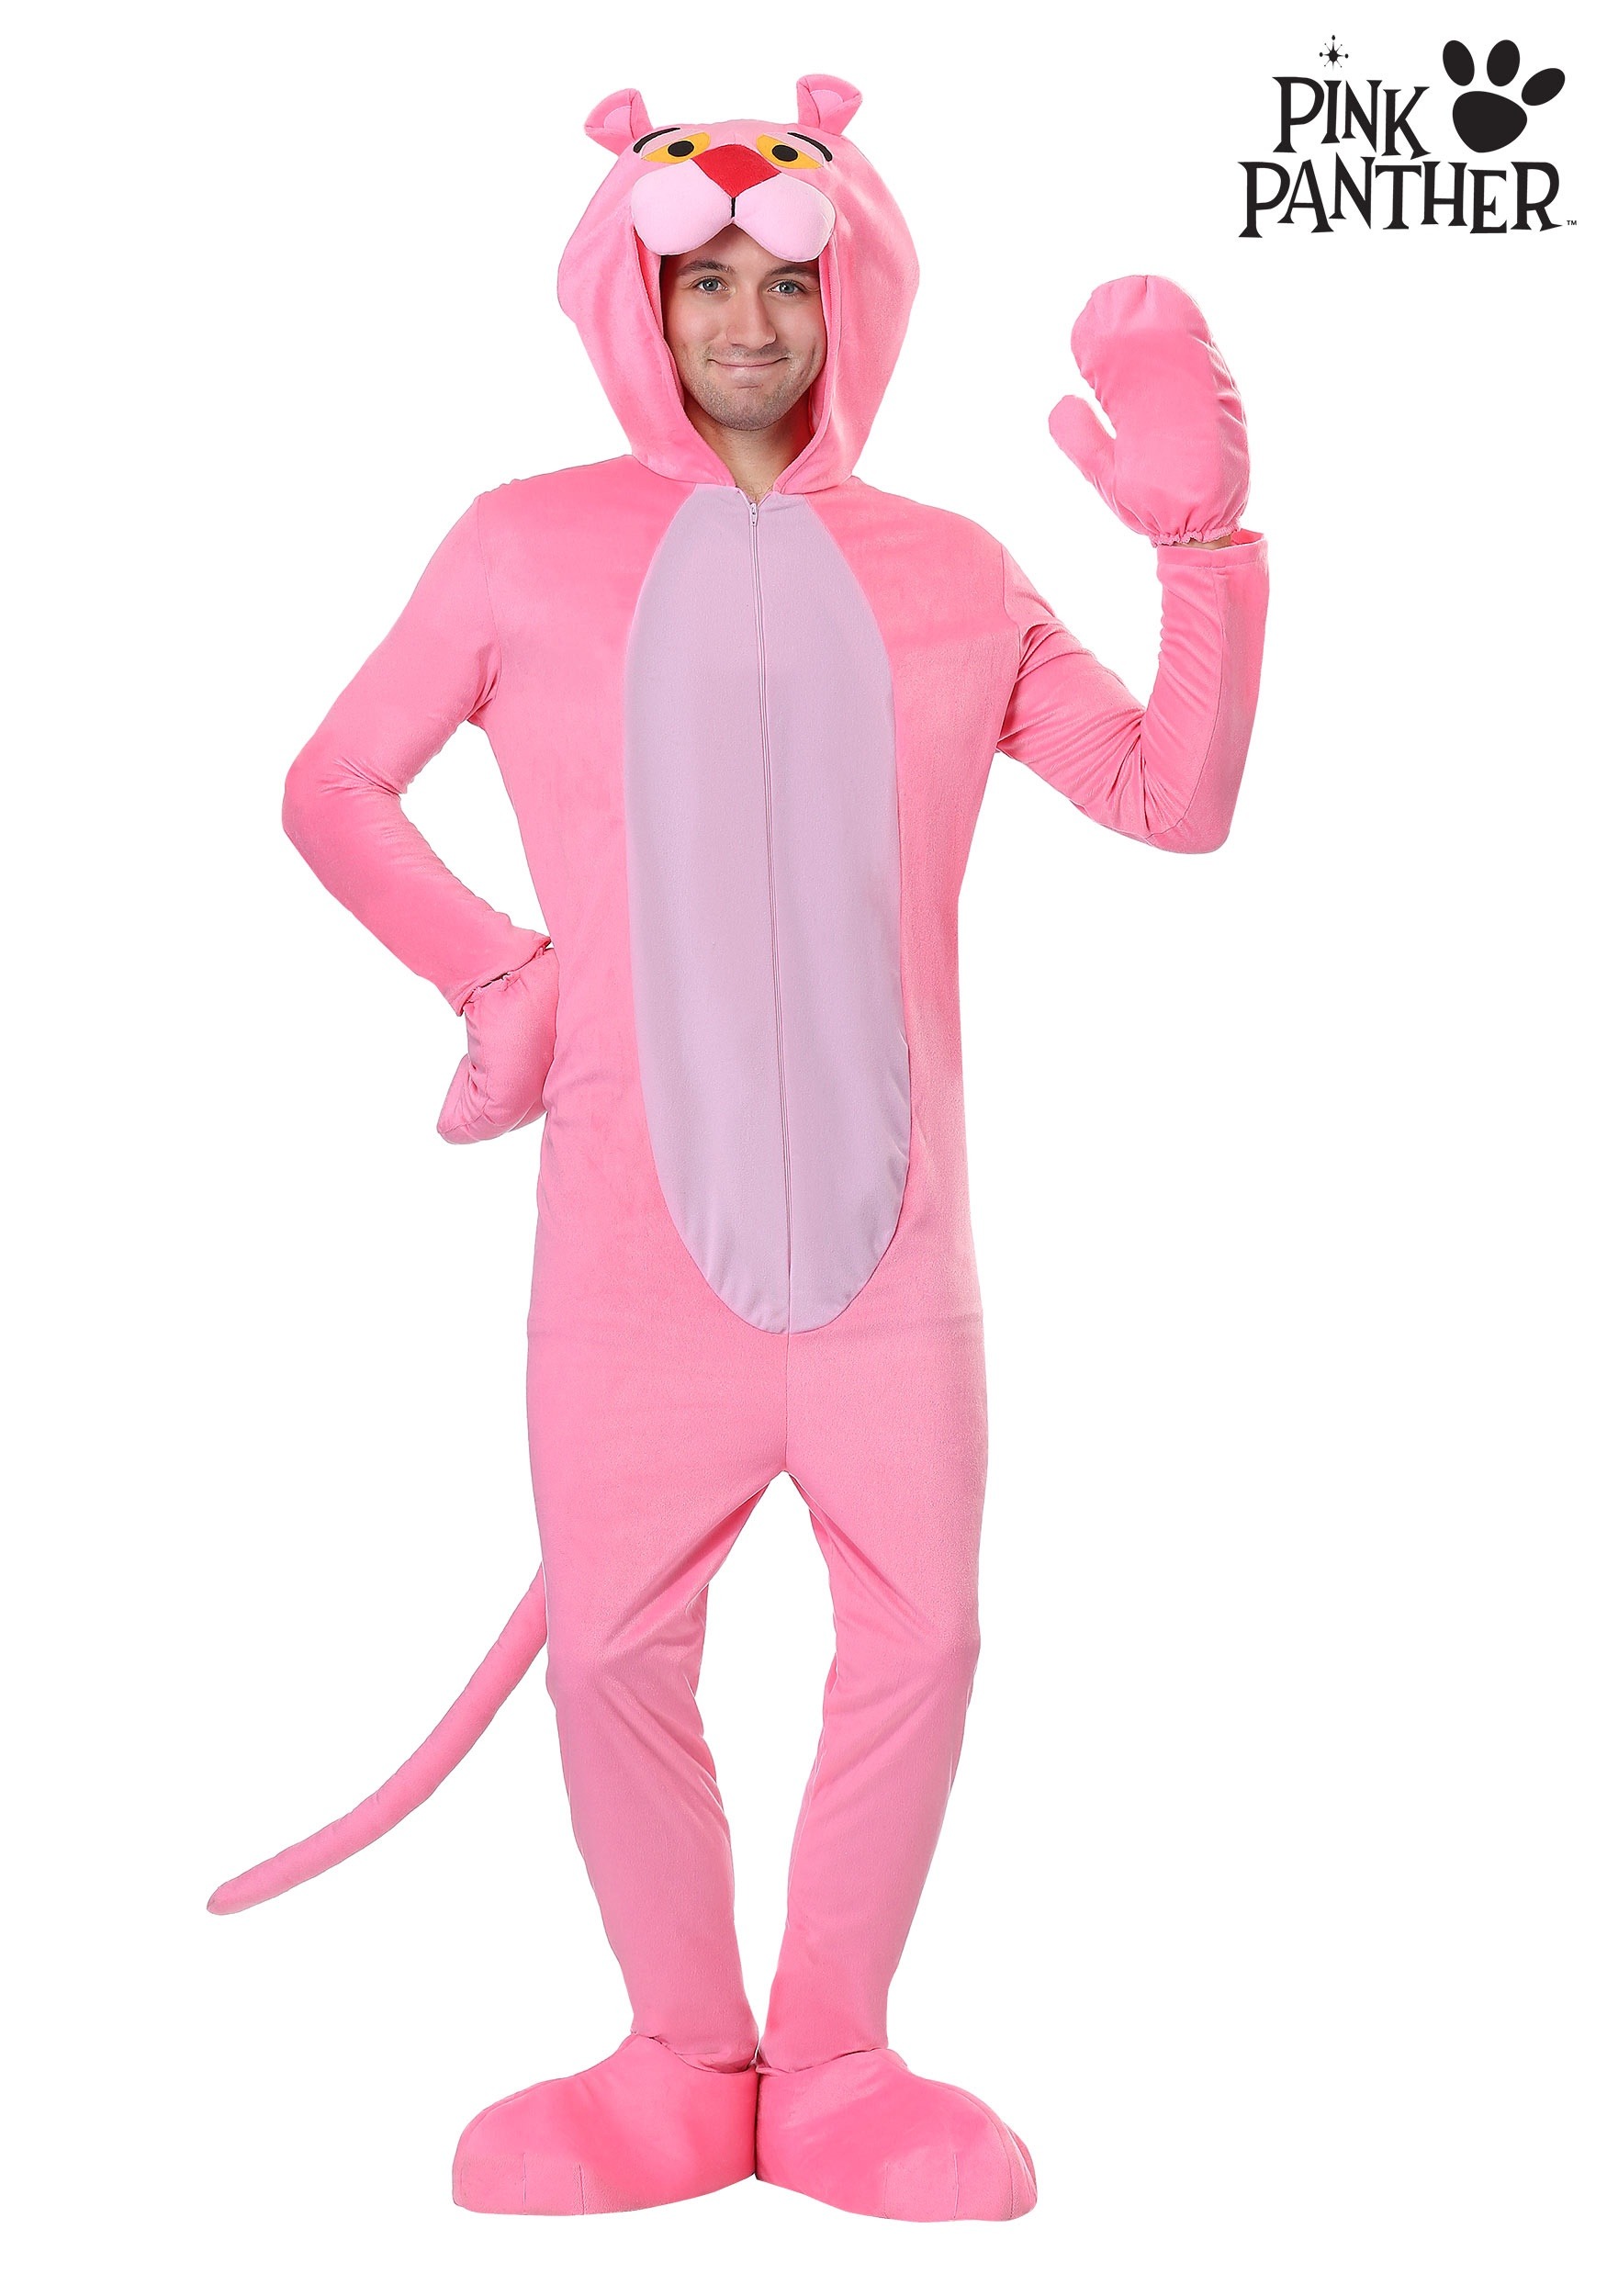 Pink panther costume